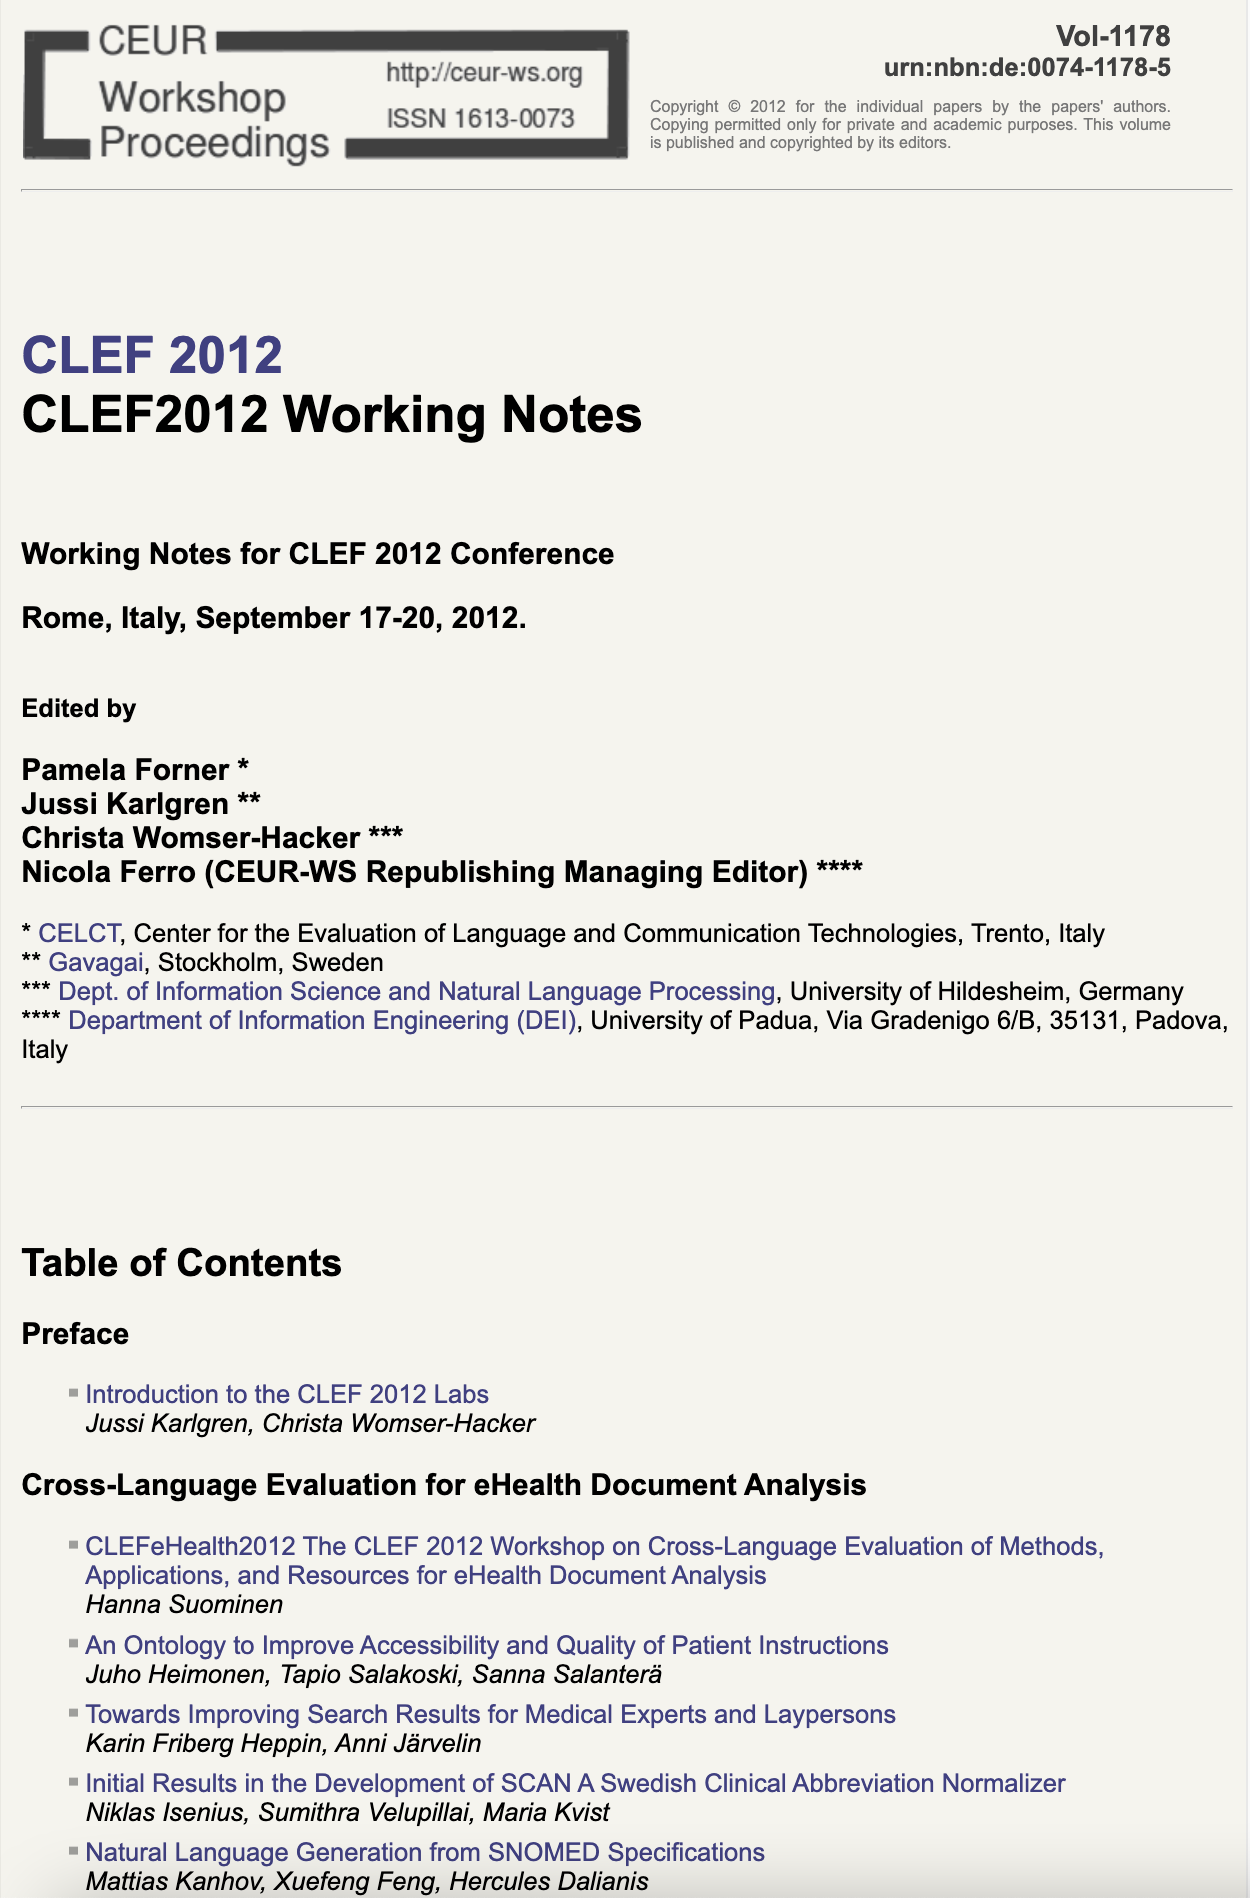 CLEF 2012 CEUR-WS Working Notes page